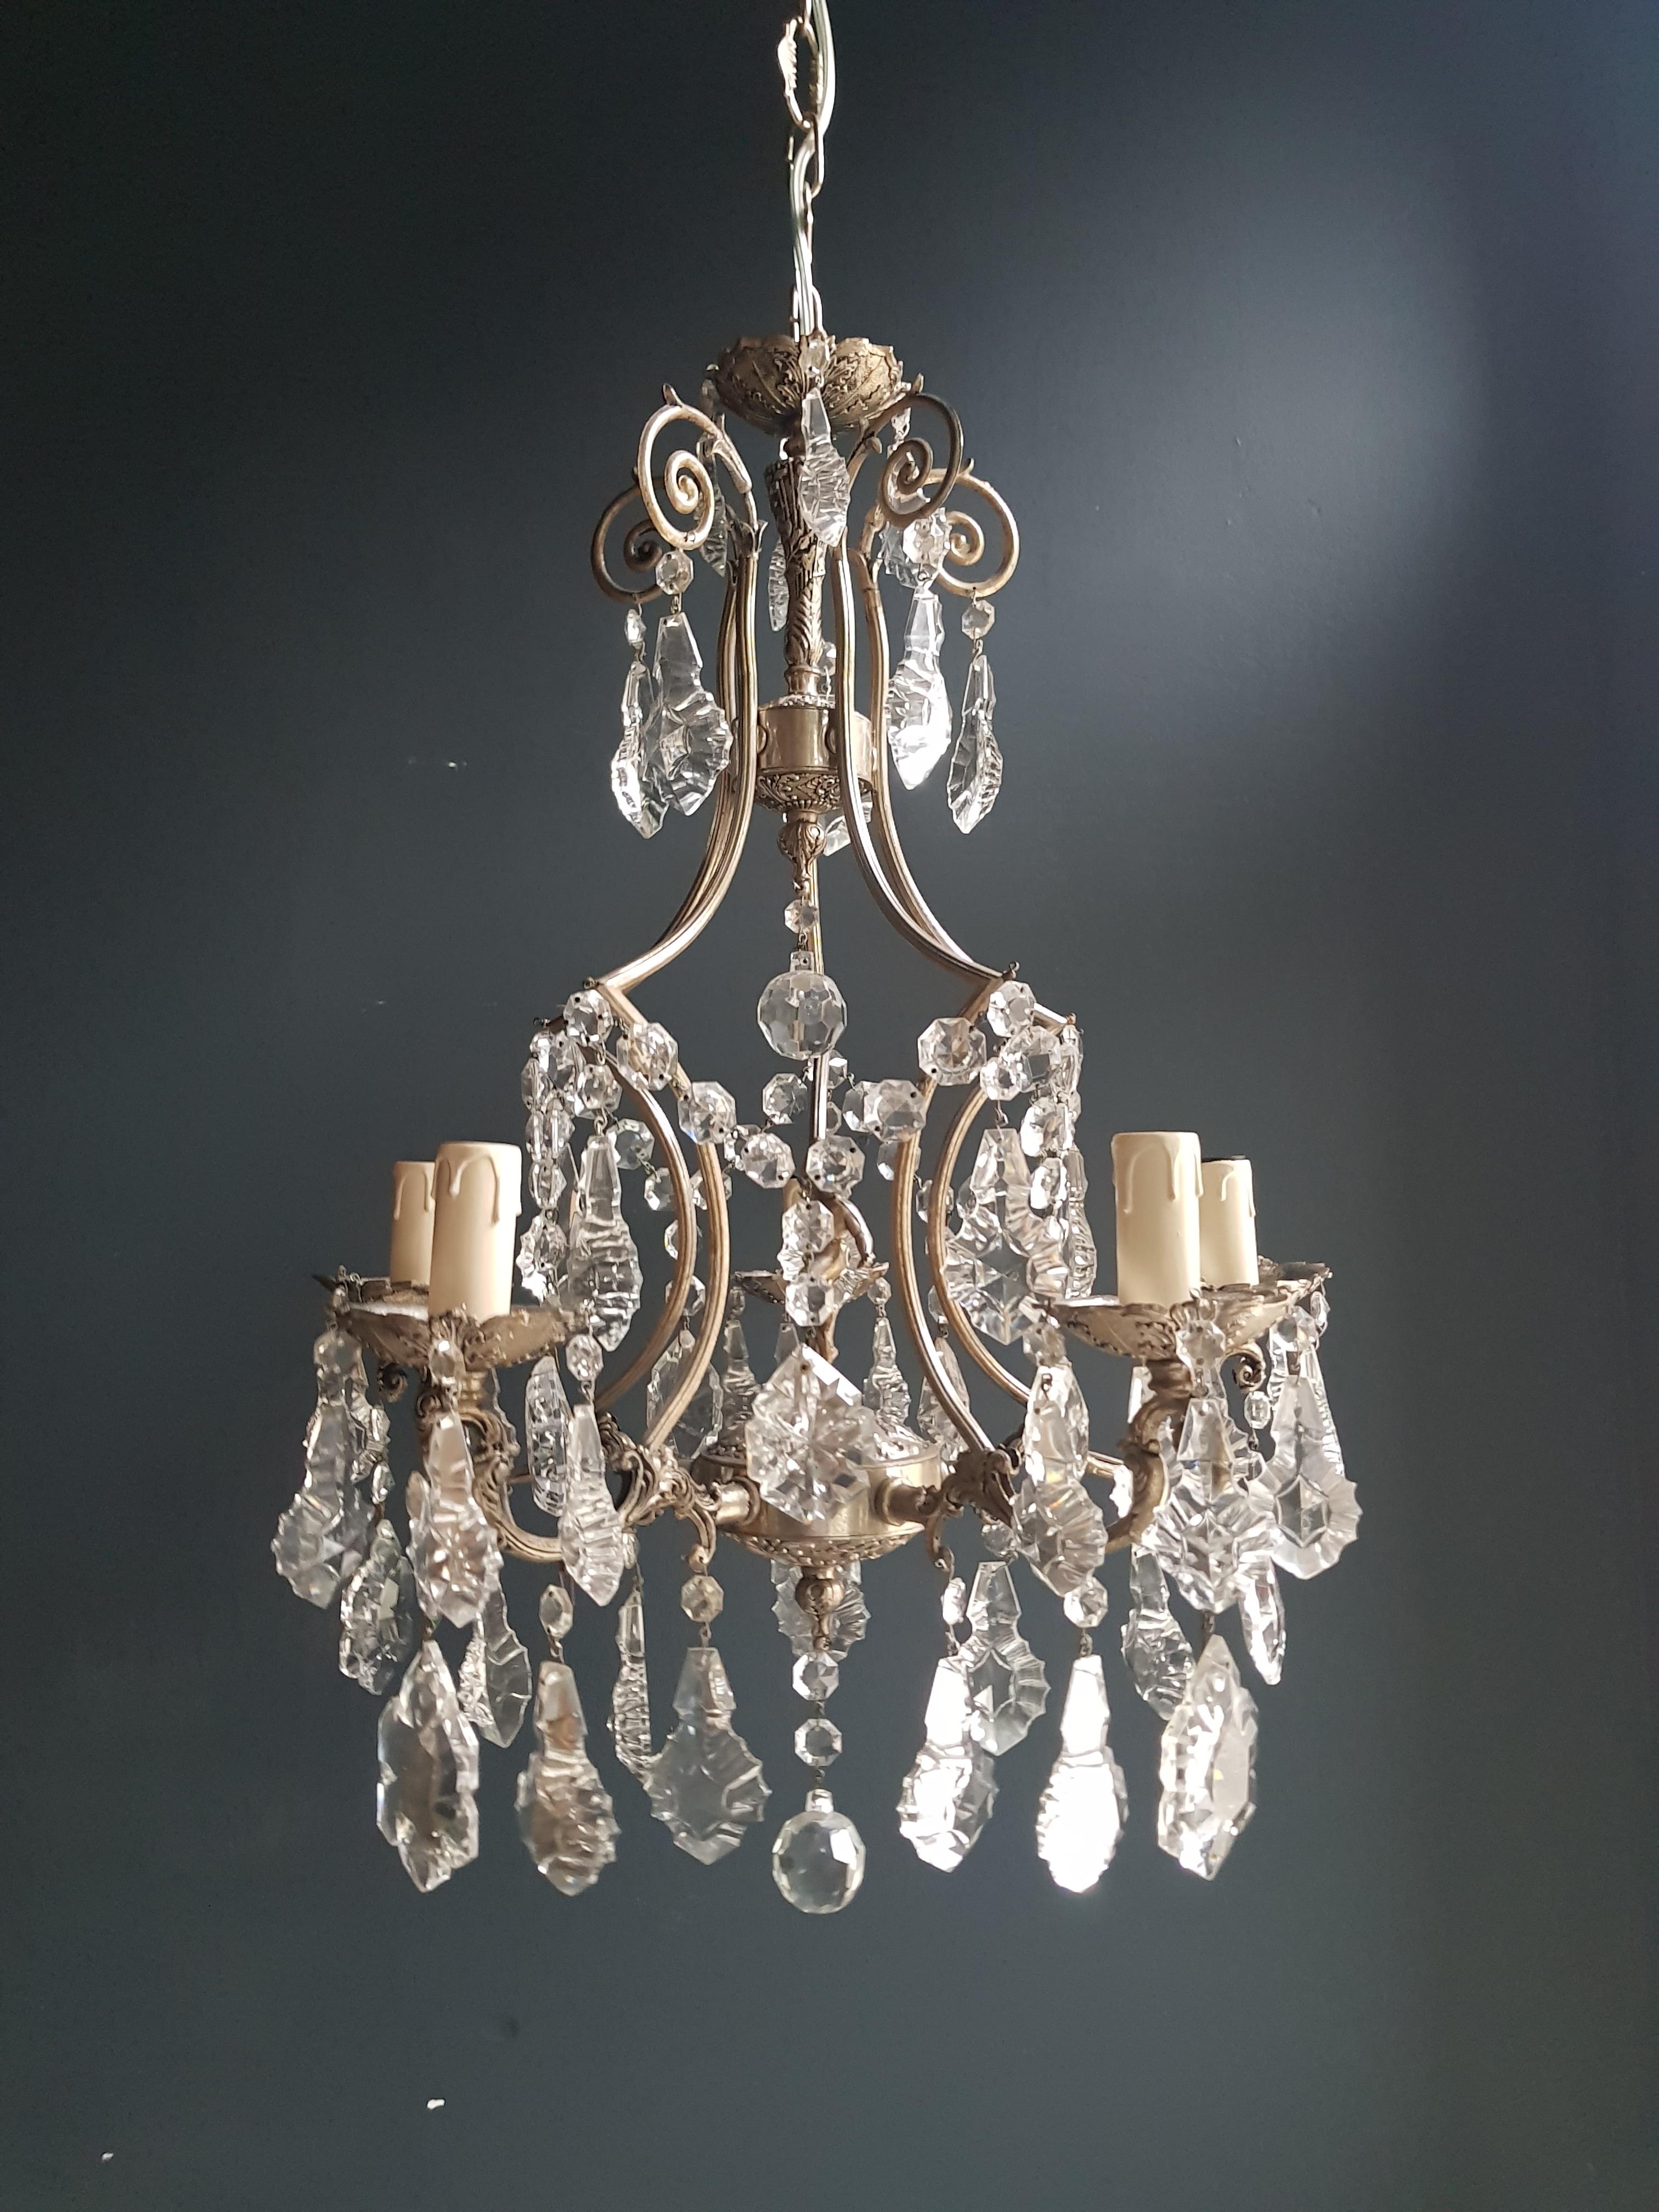 Hand-Knotted Silver Cage Putt Crystal Chandelier Antique Ceiling Lamp Lustre Brass